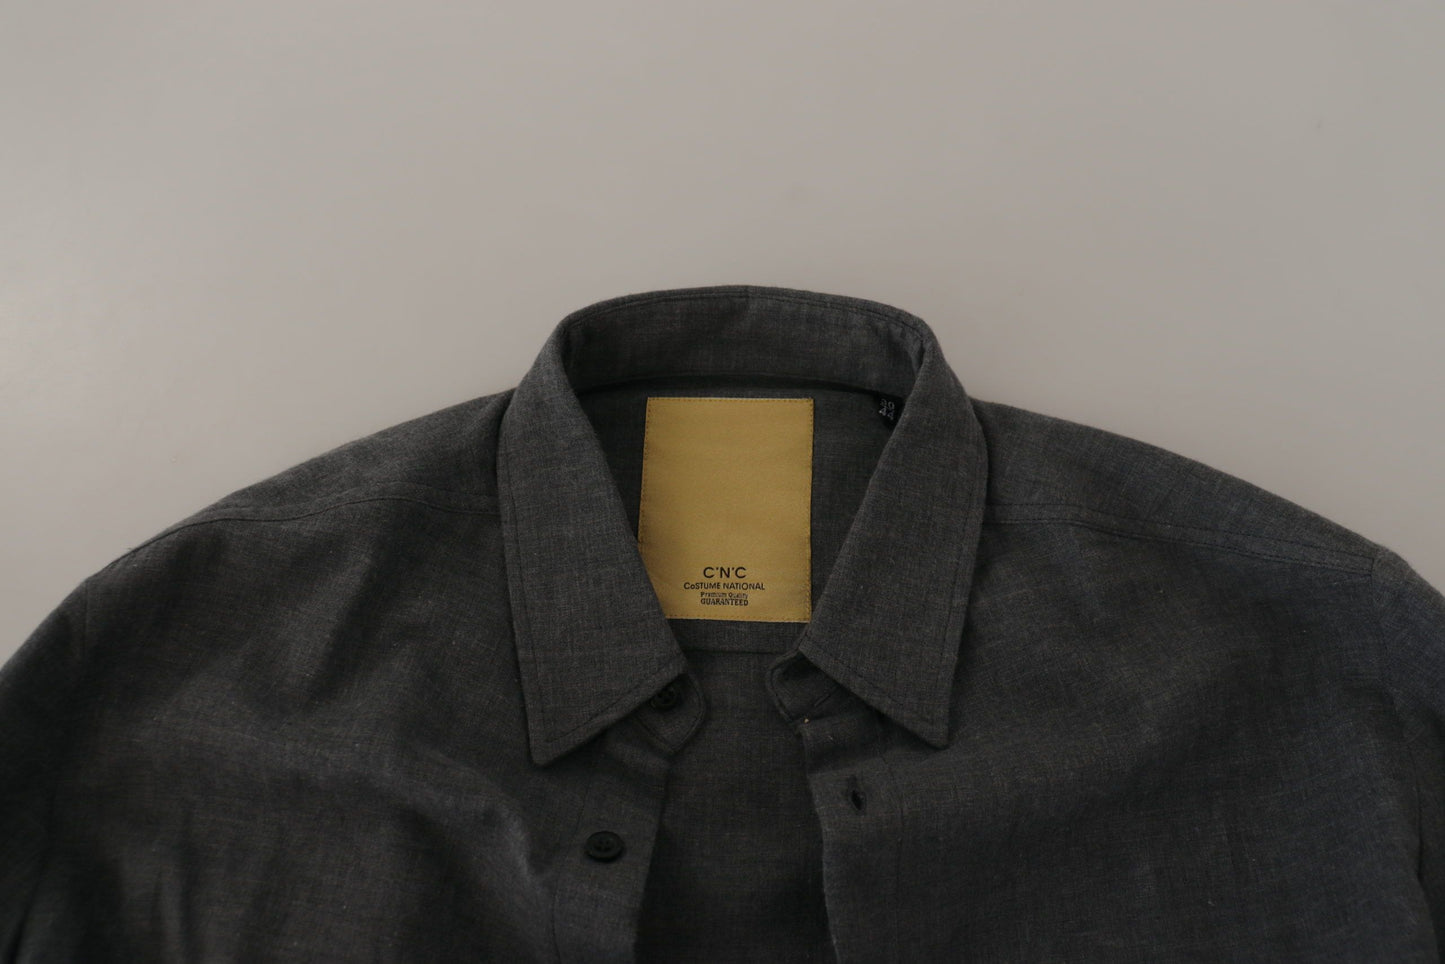 Costume National Dark Grey Cotton Casual Men's Shirt - Designed by Costume National Available to Buy at a Discounted Price on Moon Behind The Hill Online Designer Discount Store